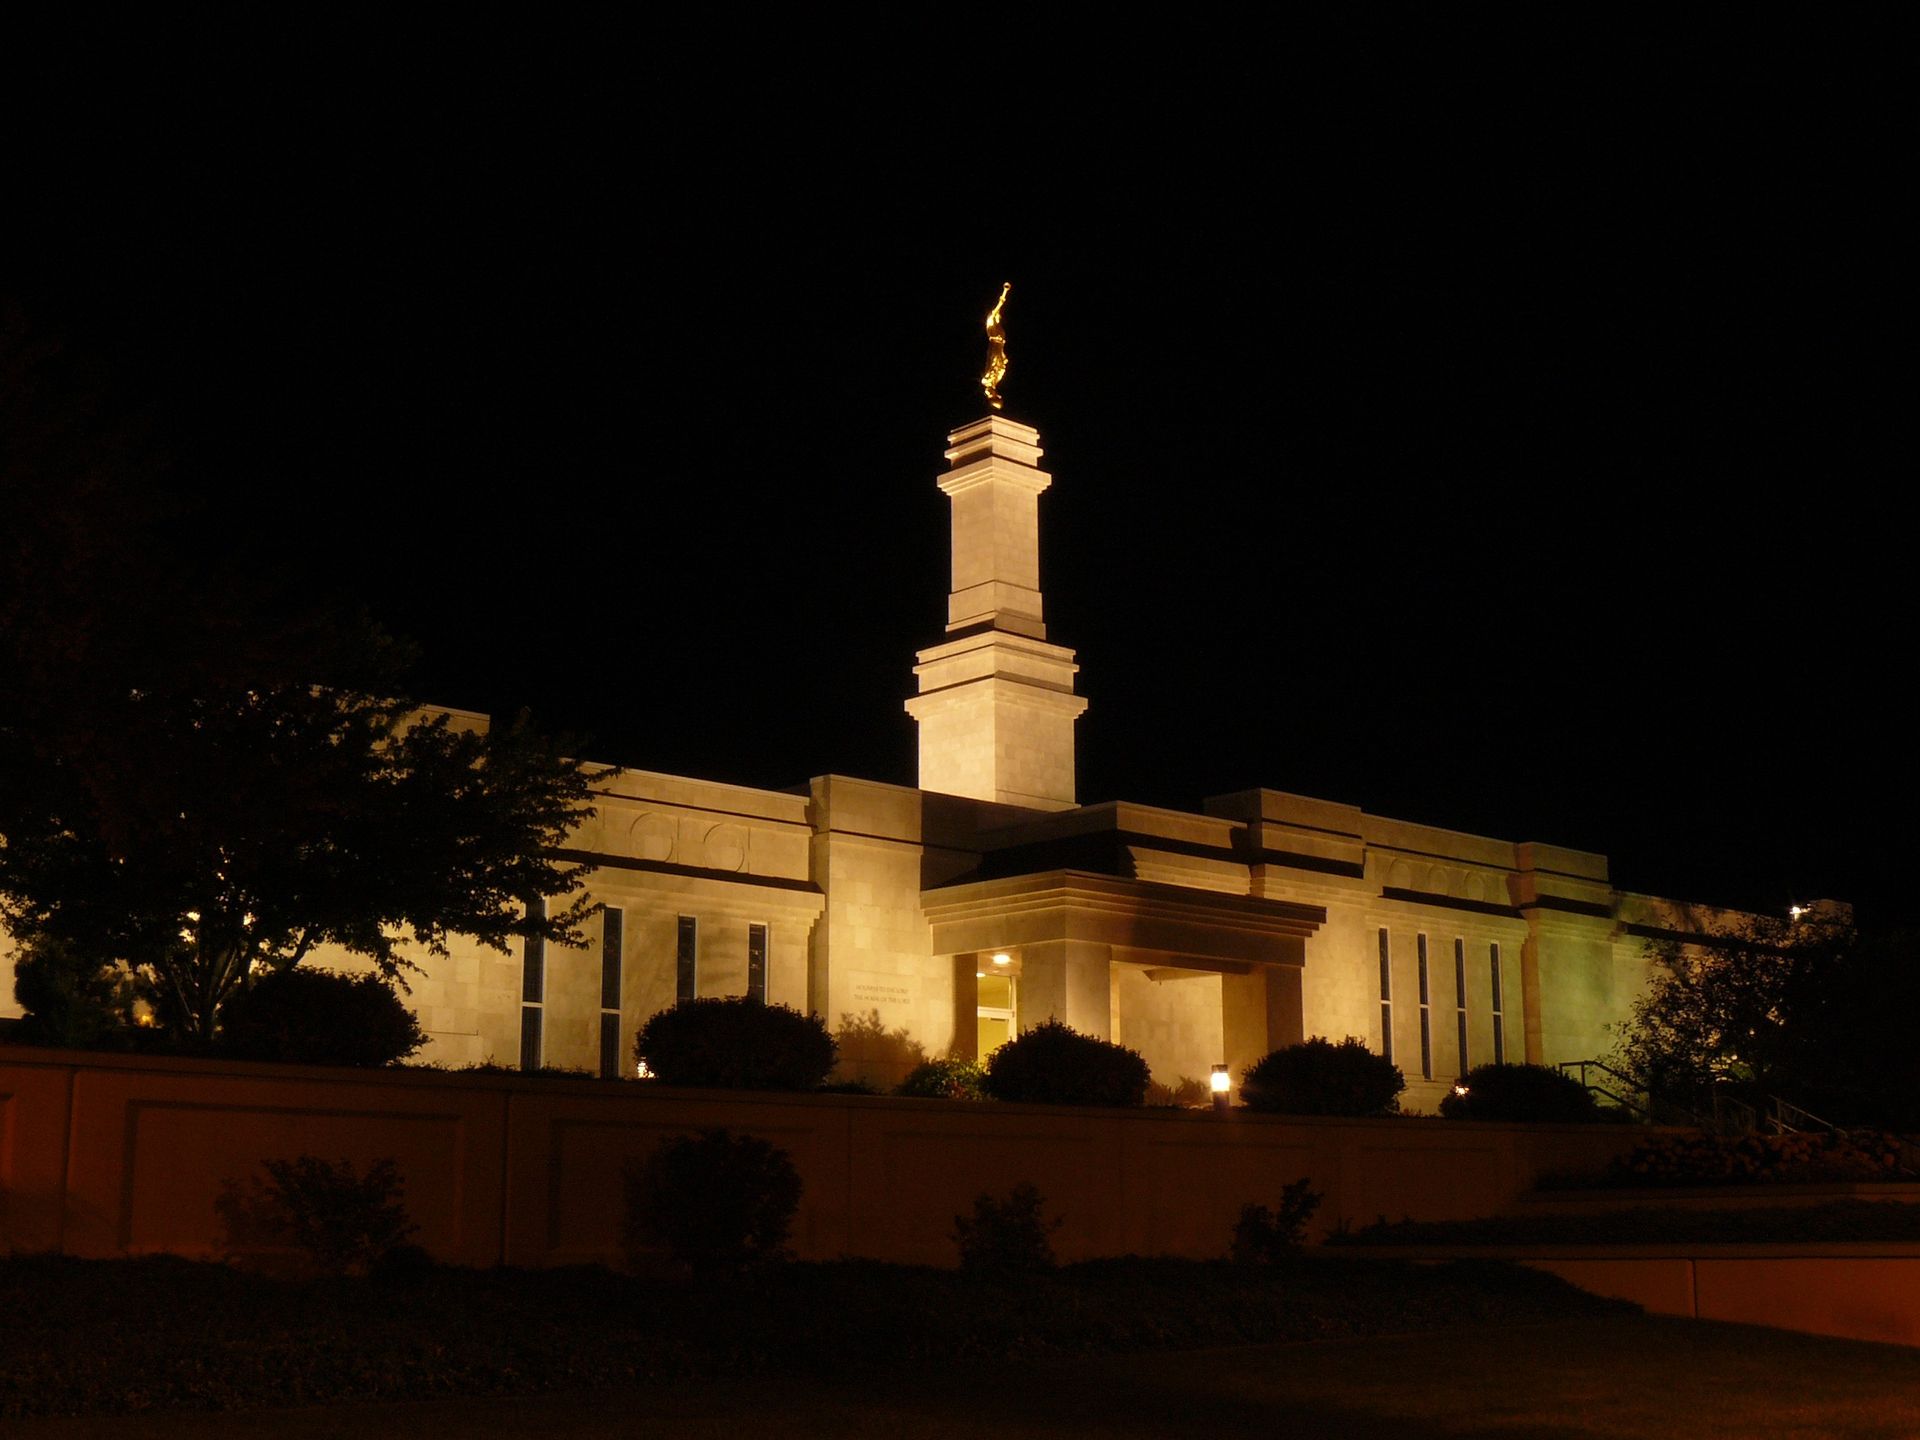 The Monticello Utah Temple in the evening, including scenery.